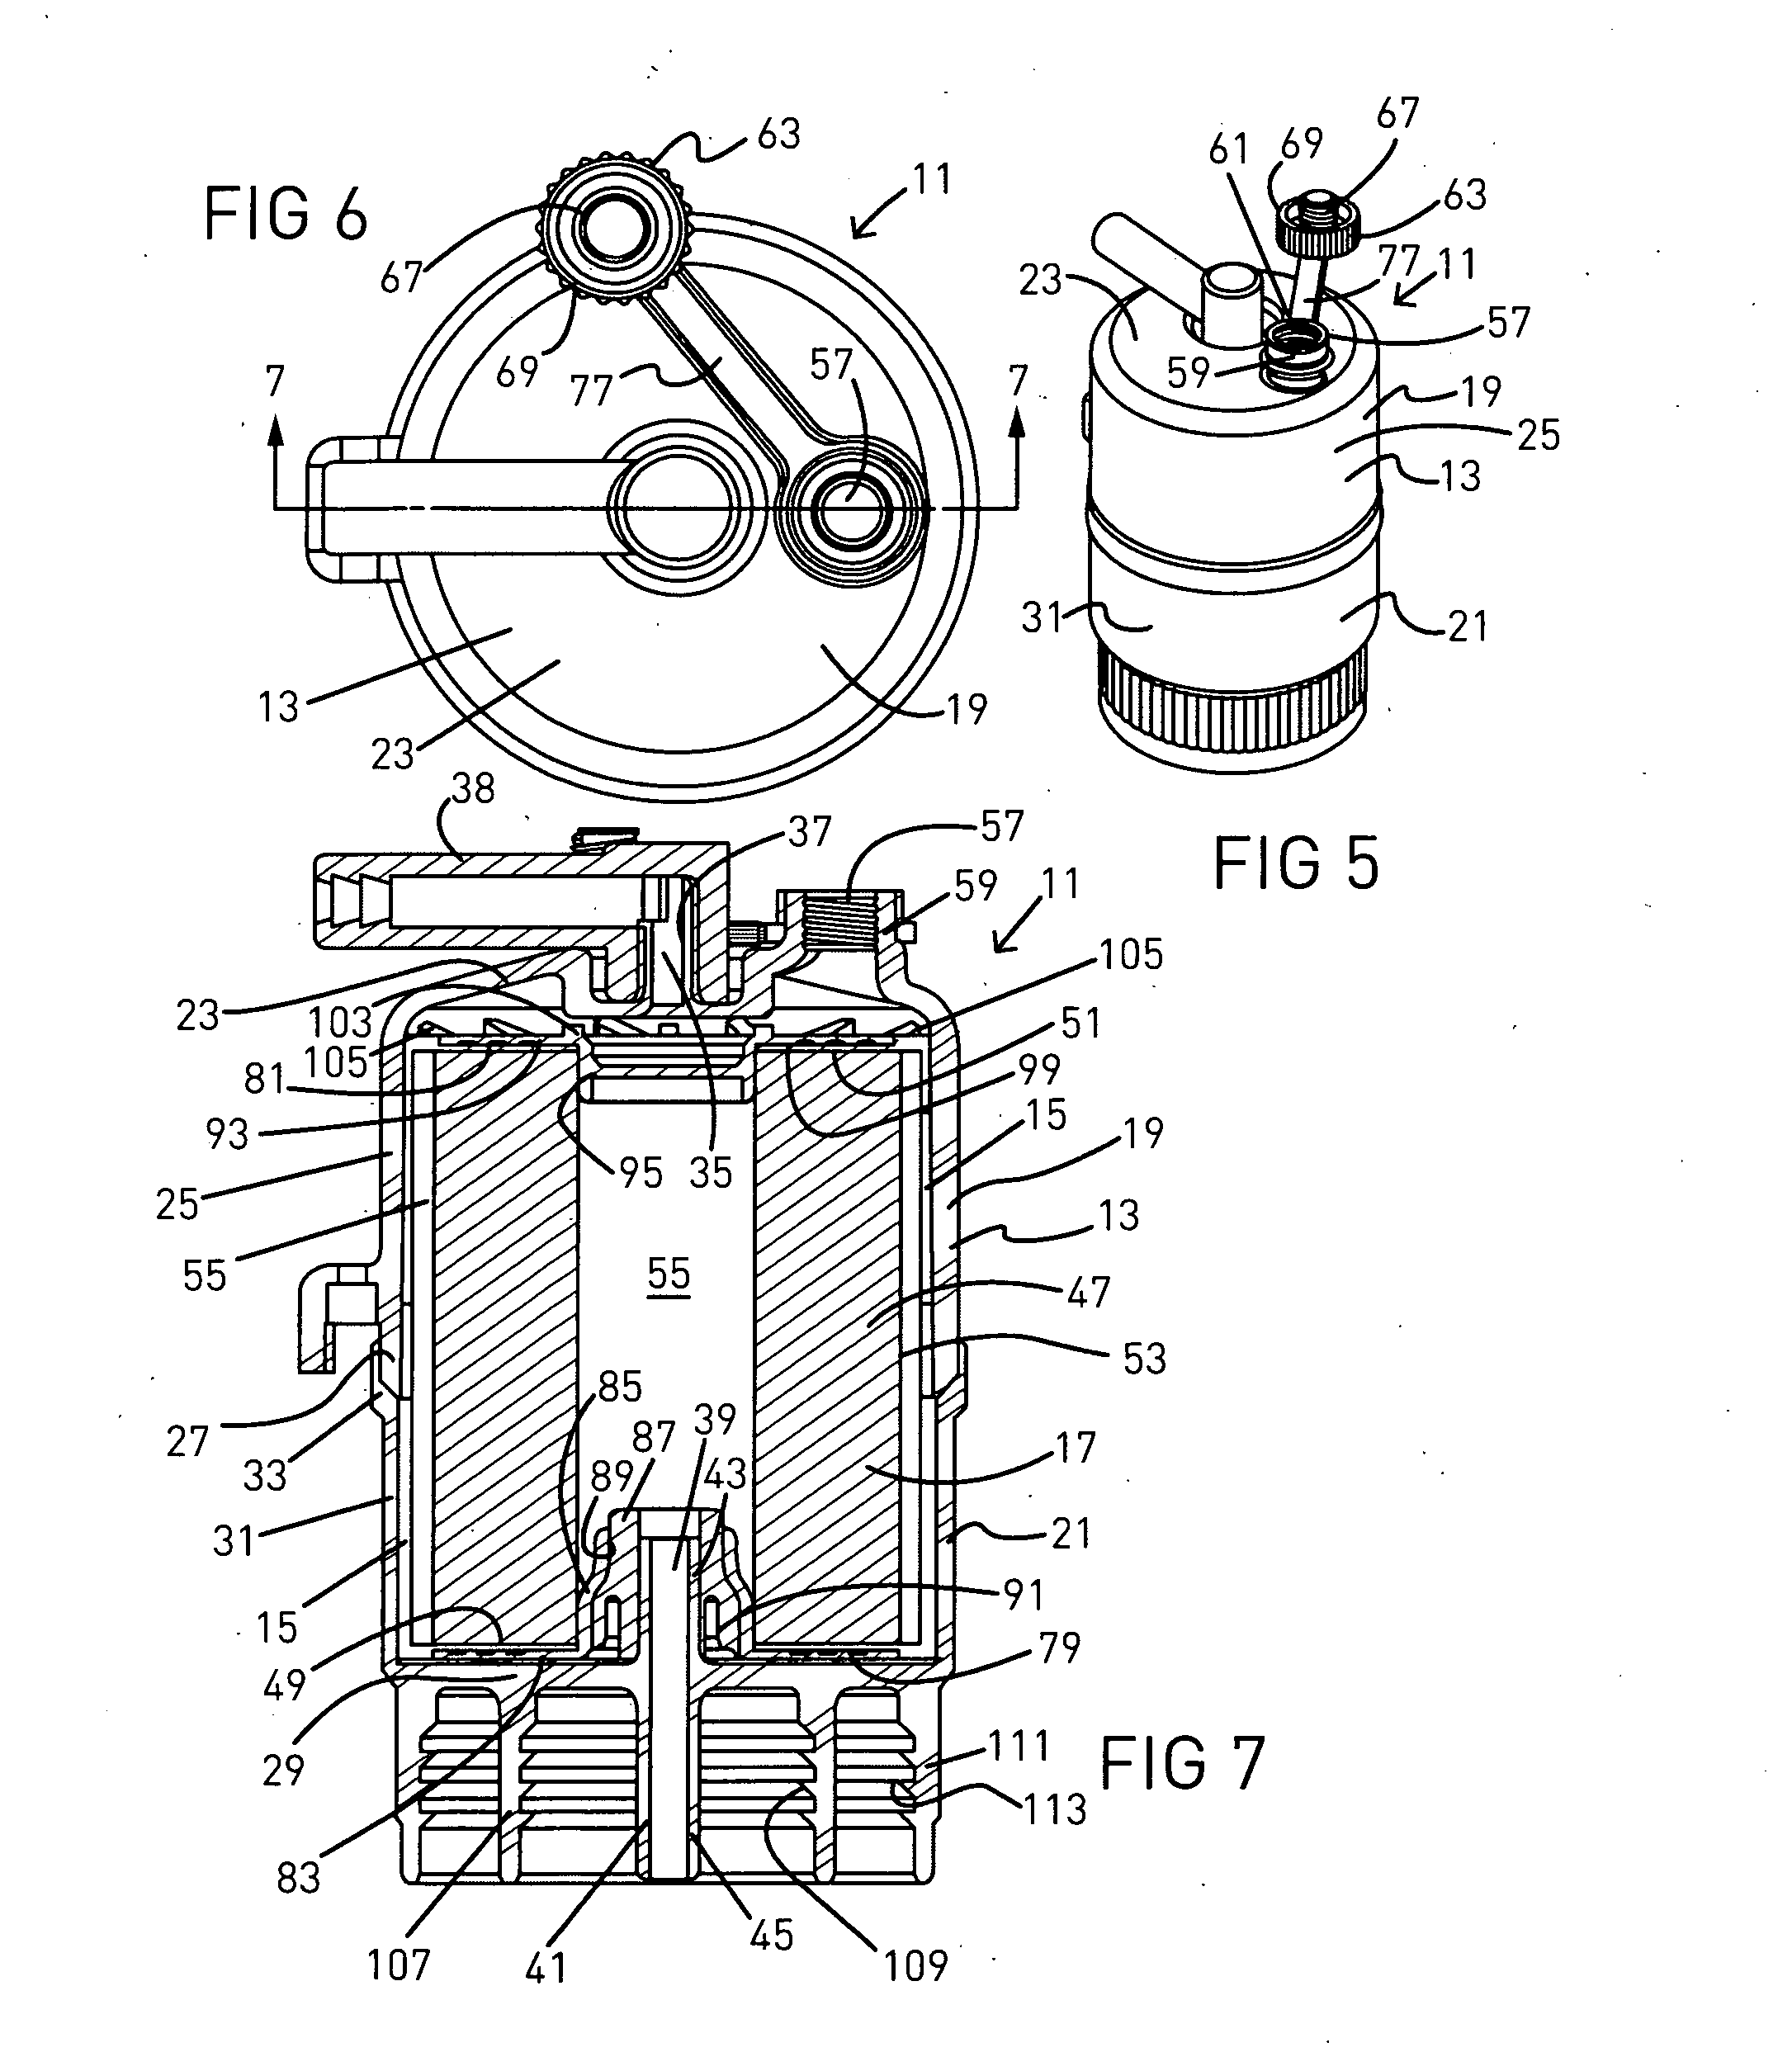 Drinking water filtration and/or purification apparatus